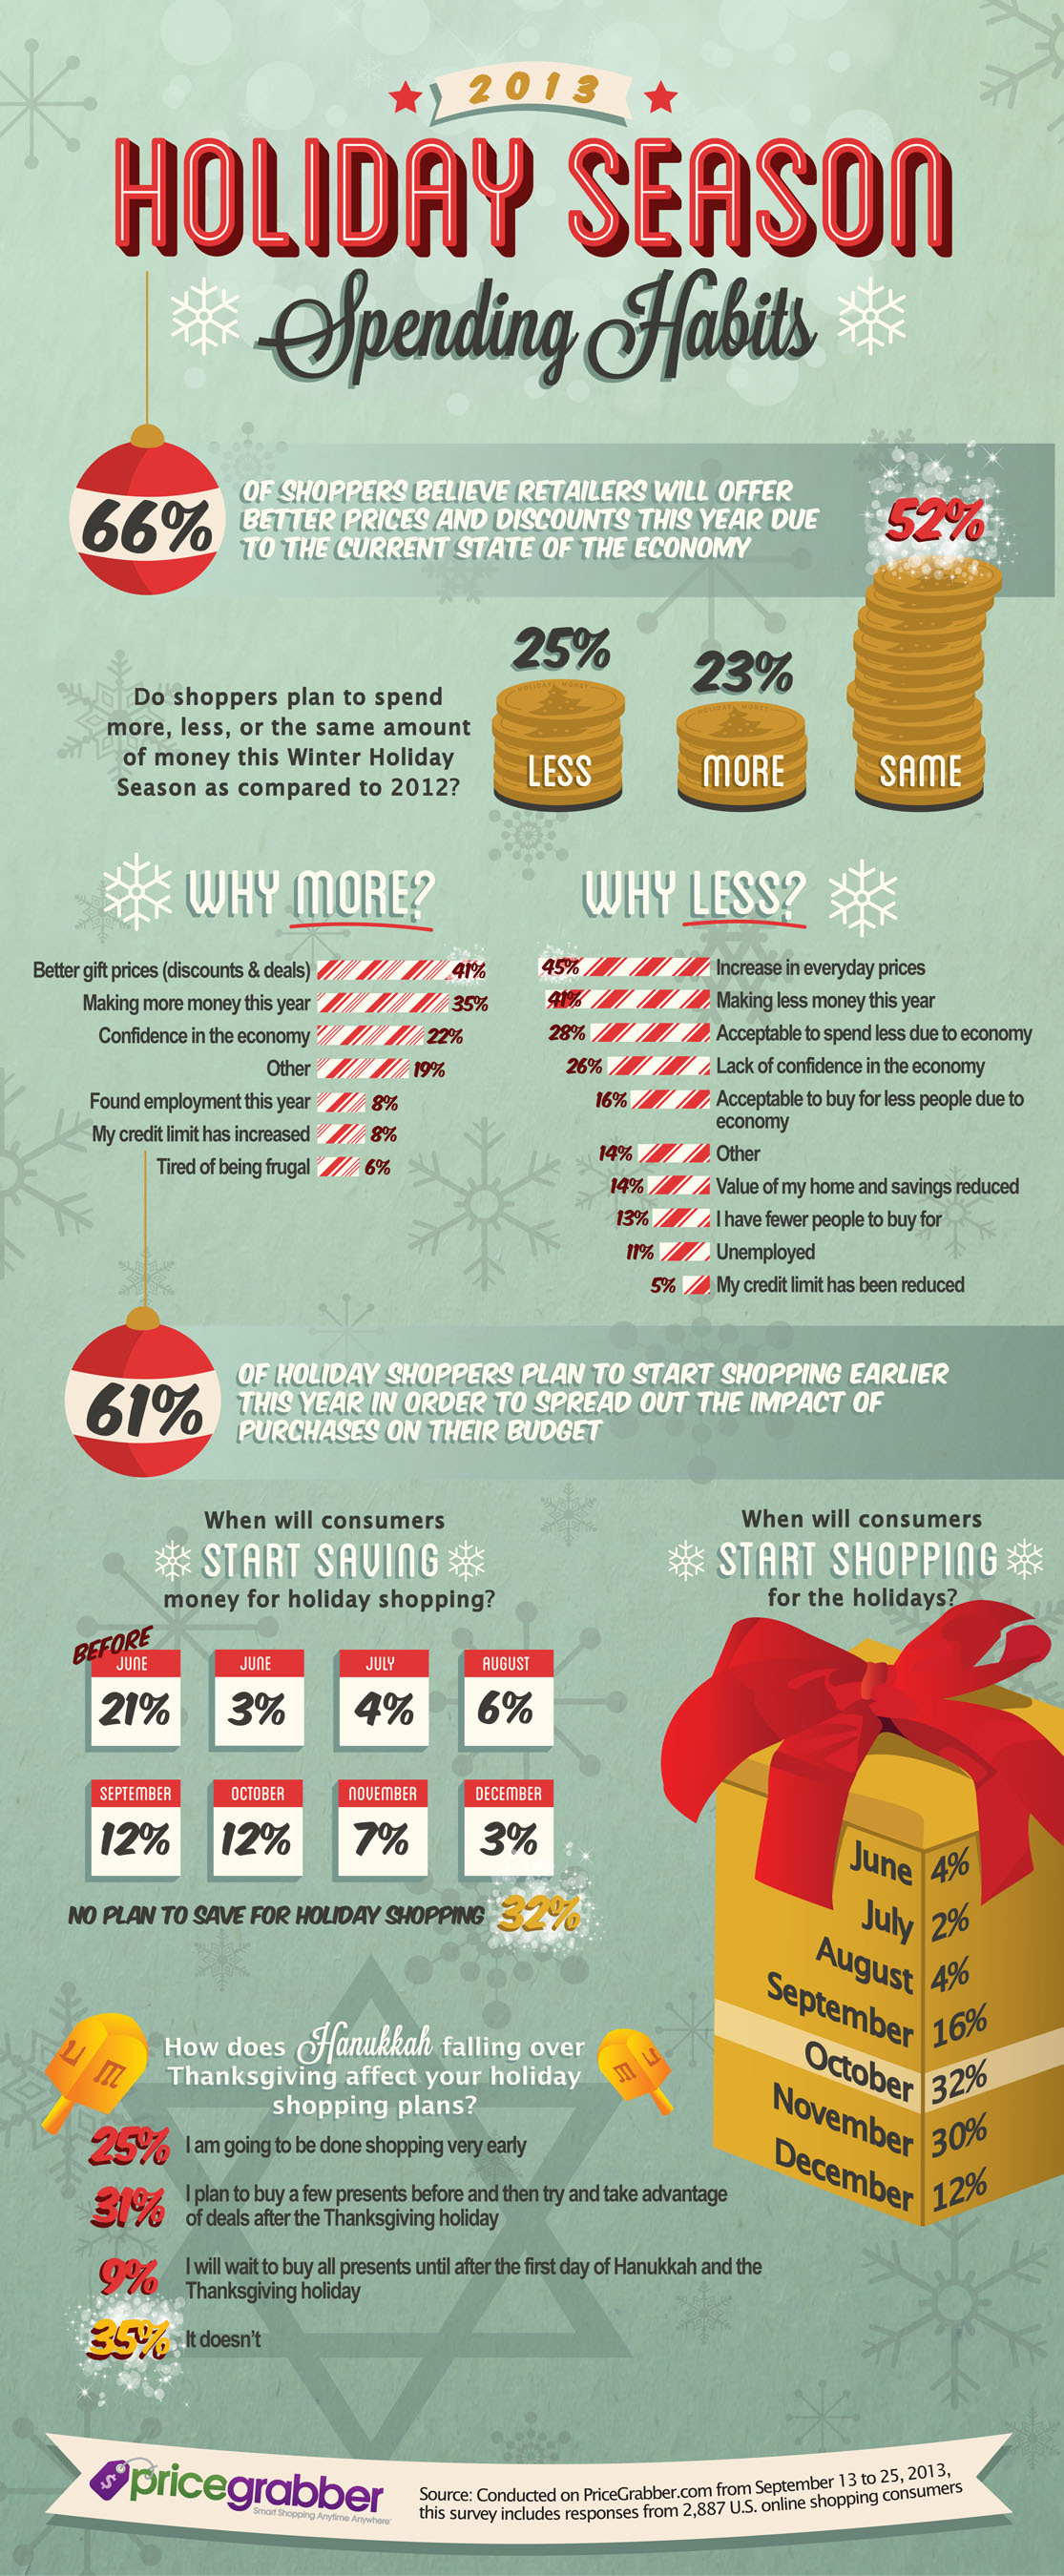 Holiday 2013 Spending Habits from PriceGrabber. (PRNewsFoto/PriceGrabber.com) (PRNewsFoto/PRICEGRABBER.COM)